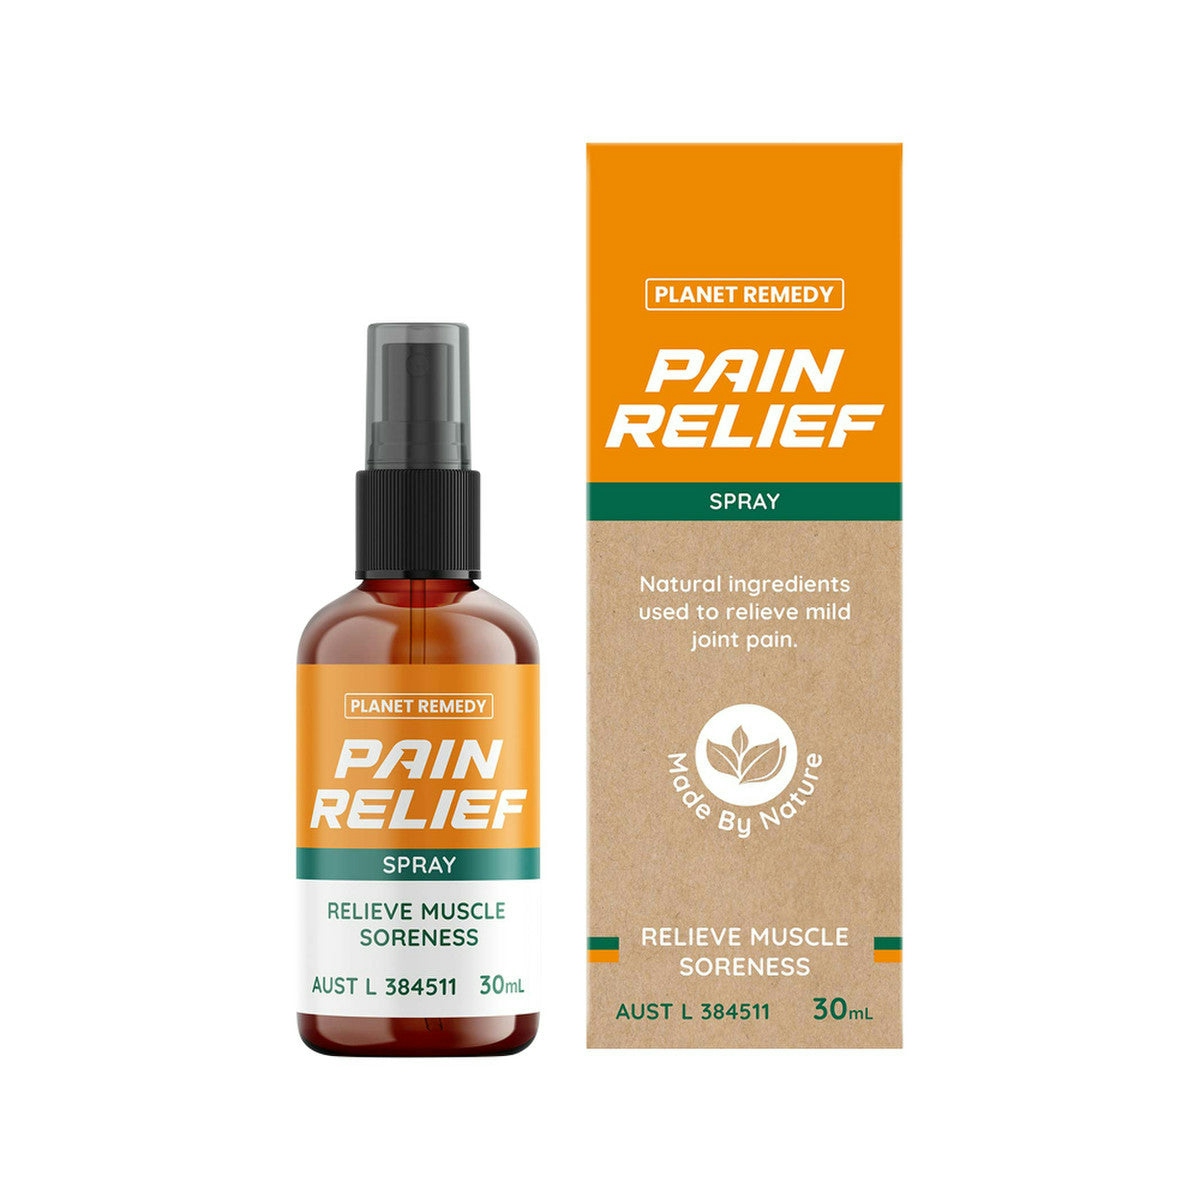 image of Planet Remedy Pain Relief (Relieve Muscle Soreness) Spray 30ml on white background